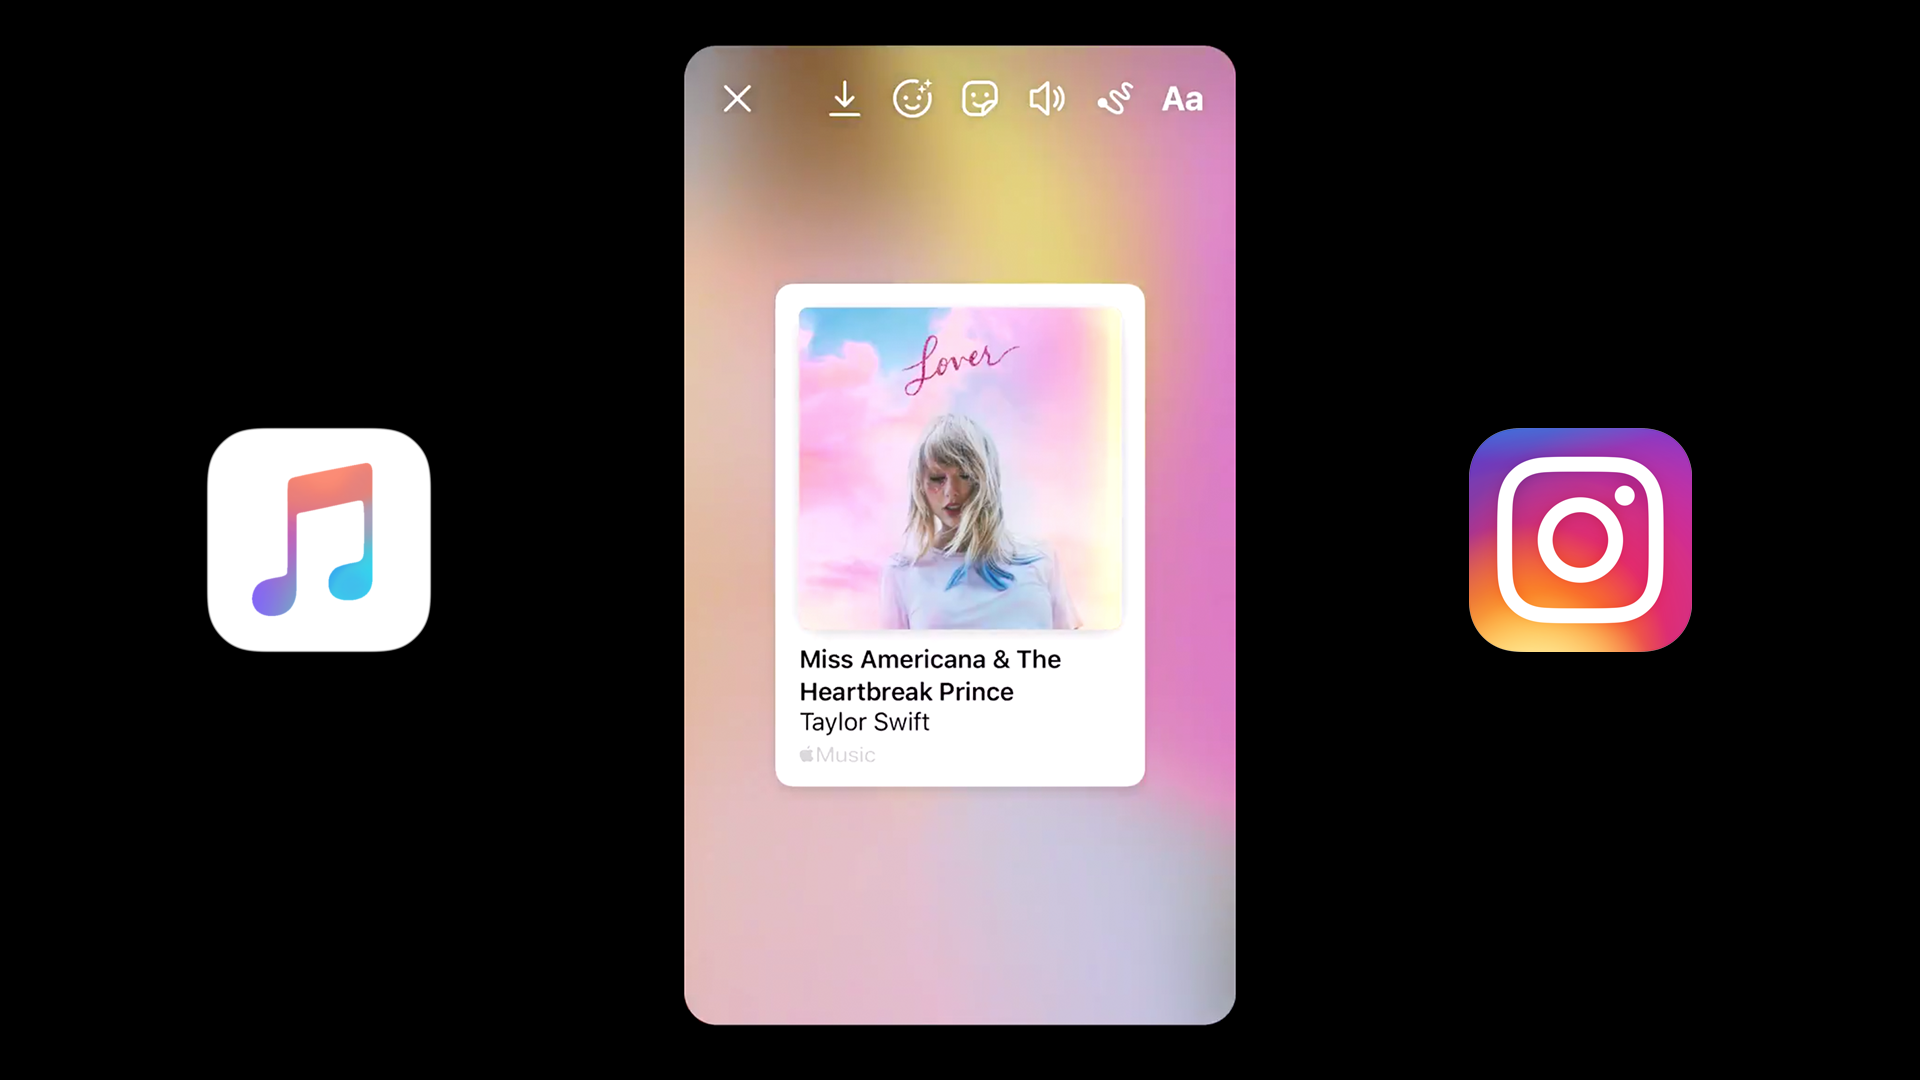 Ios 13 4 5 Beta Includes New Option To Share Songs From Apple